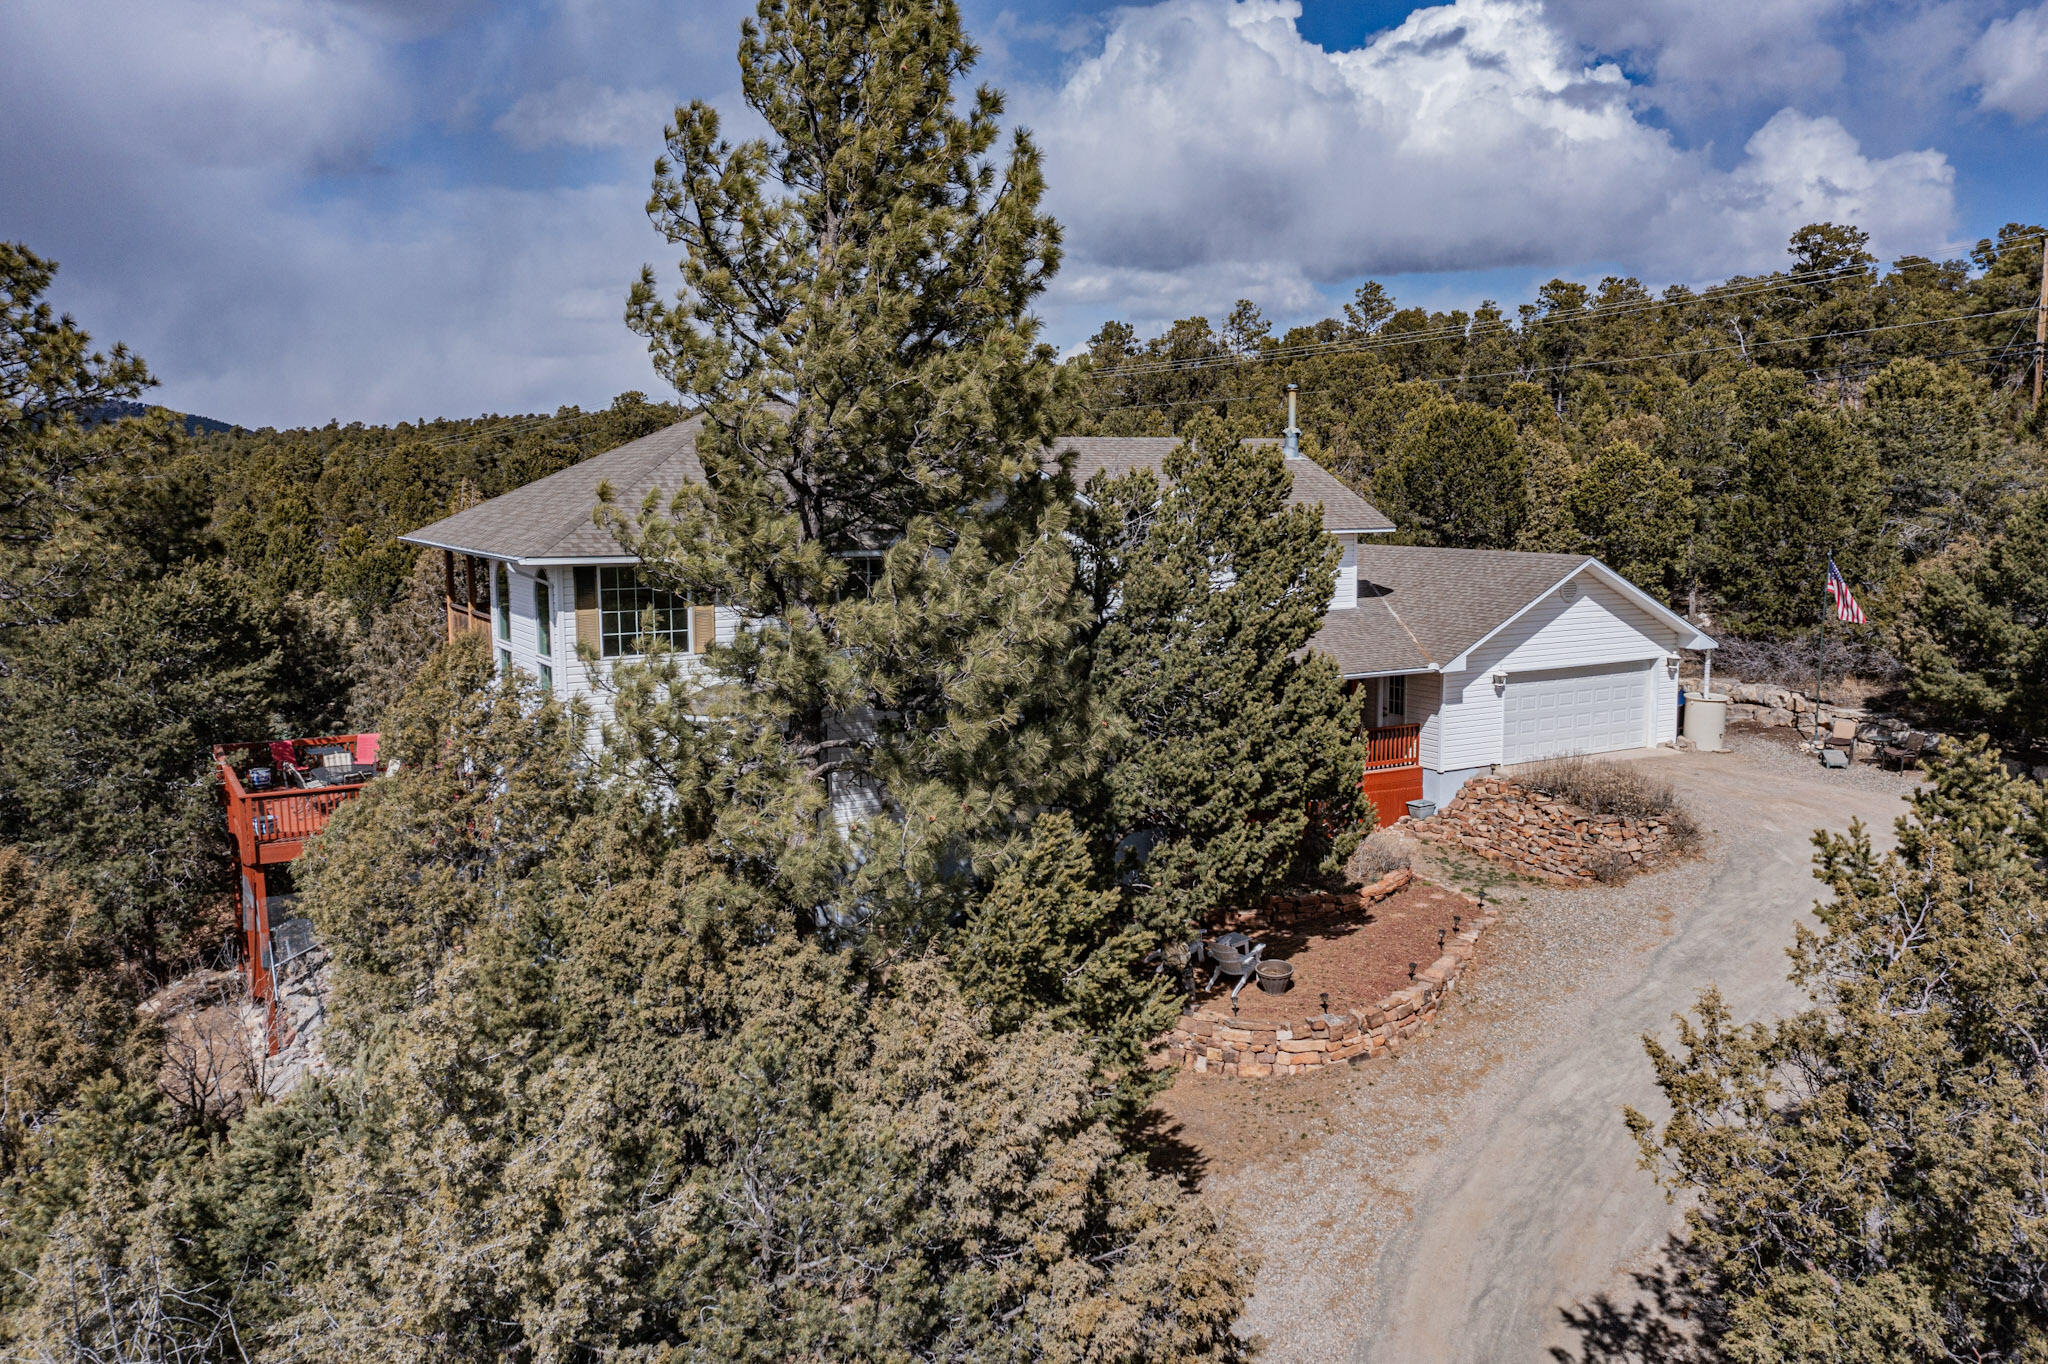 Beauty and spaciousness can be yours. Custom-built home borders the Cibola Ntl. Forest minutes from ABQ! A blend of solitude and breathtaking views from 3 private decks plus ample living space and abundant light make it a must see. The 2,800 sq. ft. floor plan has hardwood floors and a beautiful vaulted ceiling w/ large west-facing windows. Formal dining room, large kitchen and island, cooktop w/ double oven, granite counter tops make entertaining a joy. An off-kitchen deck faces Cedro Peak and the Sandias. Downstairs master suite, two upstairs bedrooms and office plus fast Internet connectivity are perfect for working from home. A new storage outbuilding, basement exercise room and workshop space all add to the attractiveness of this choice property. Additional acreage is also available!